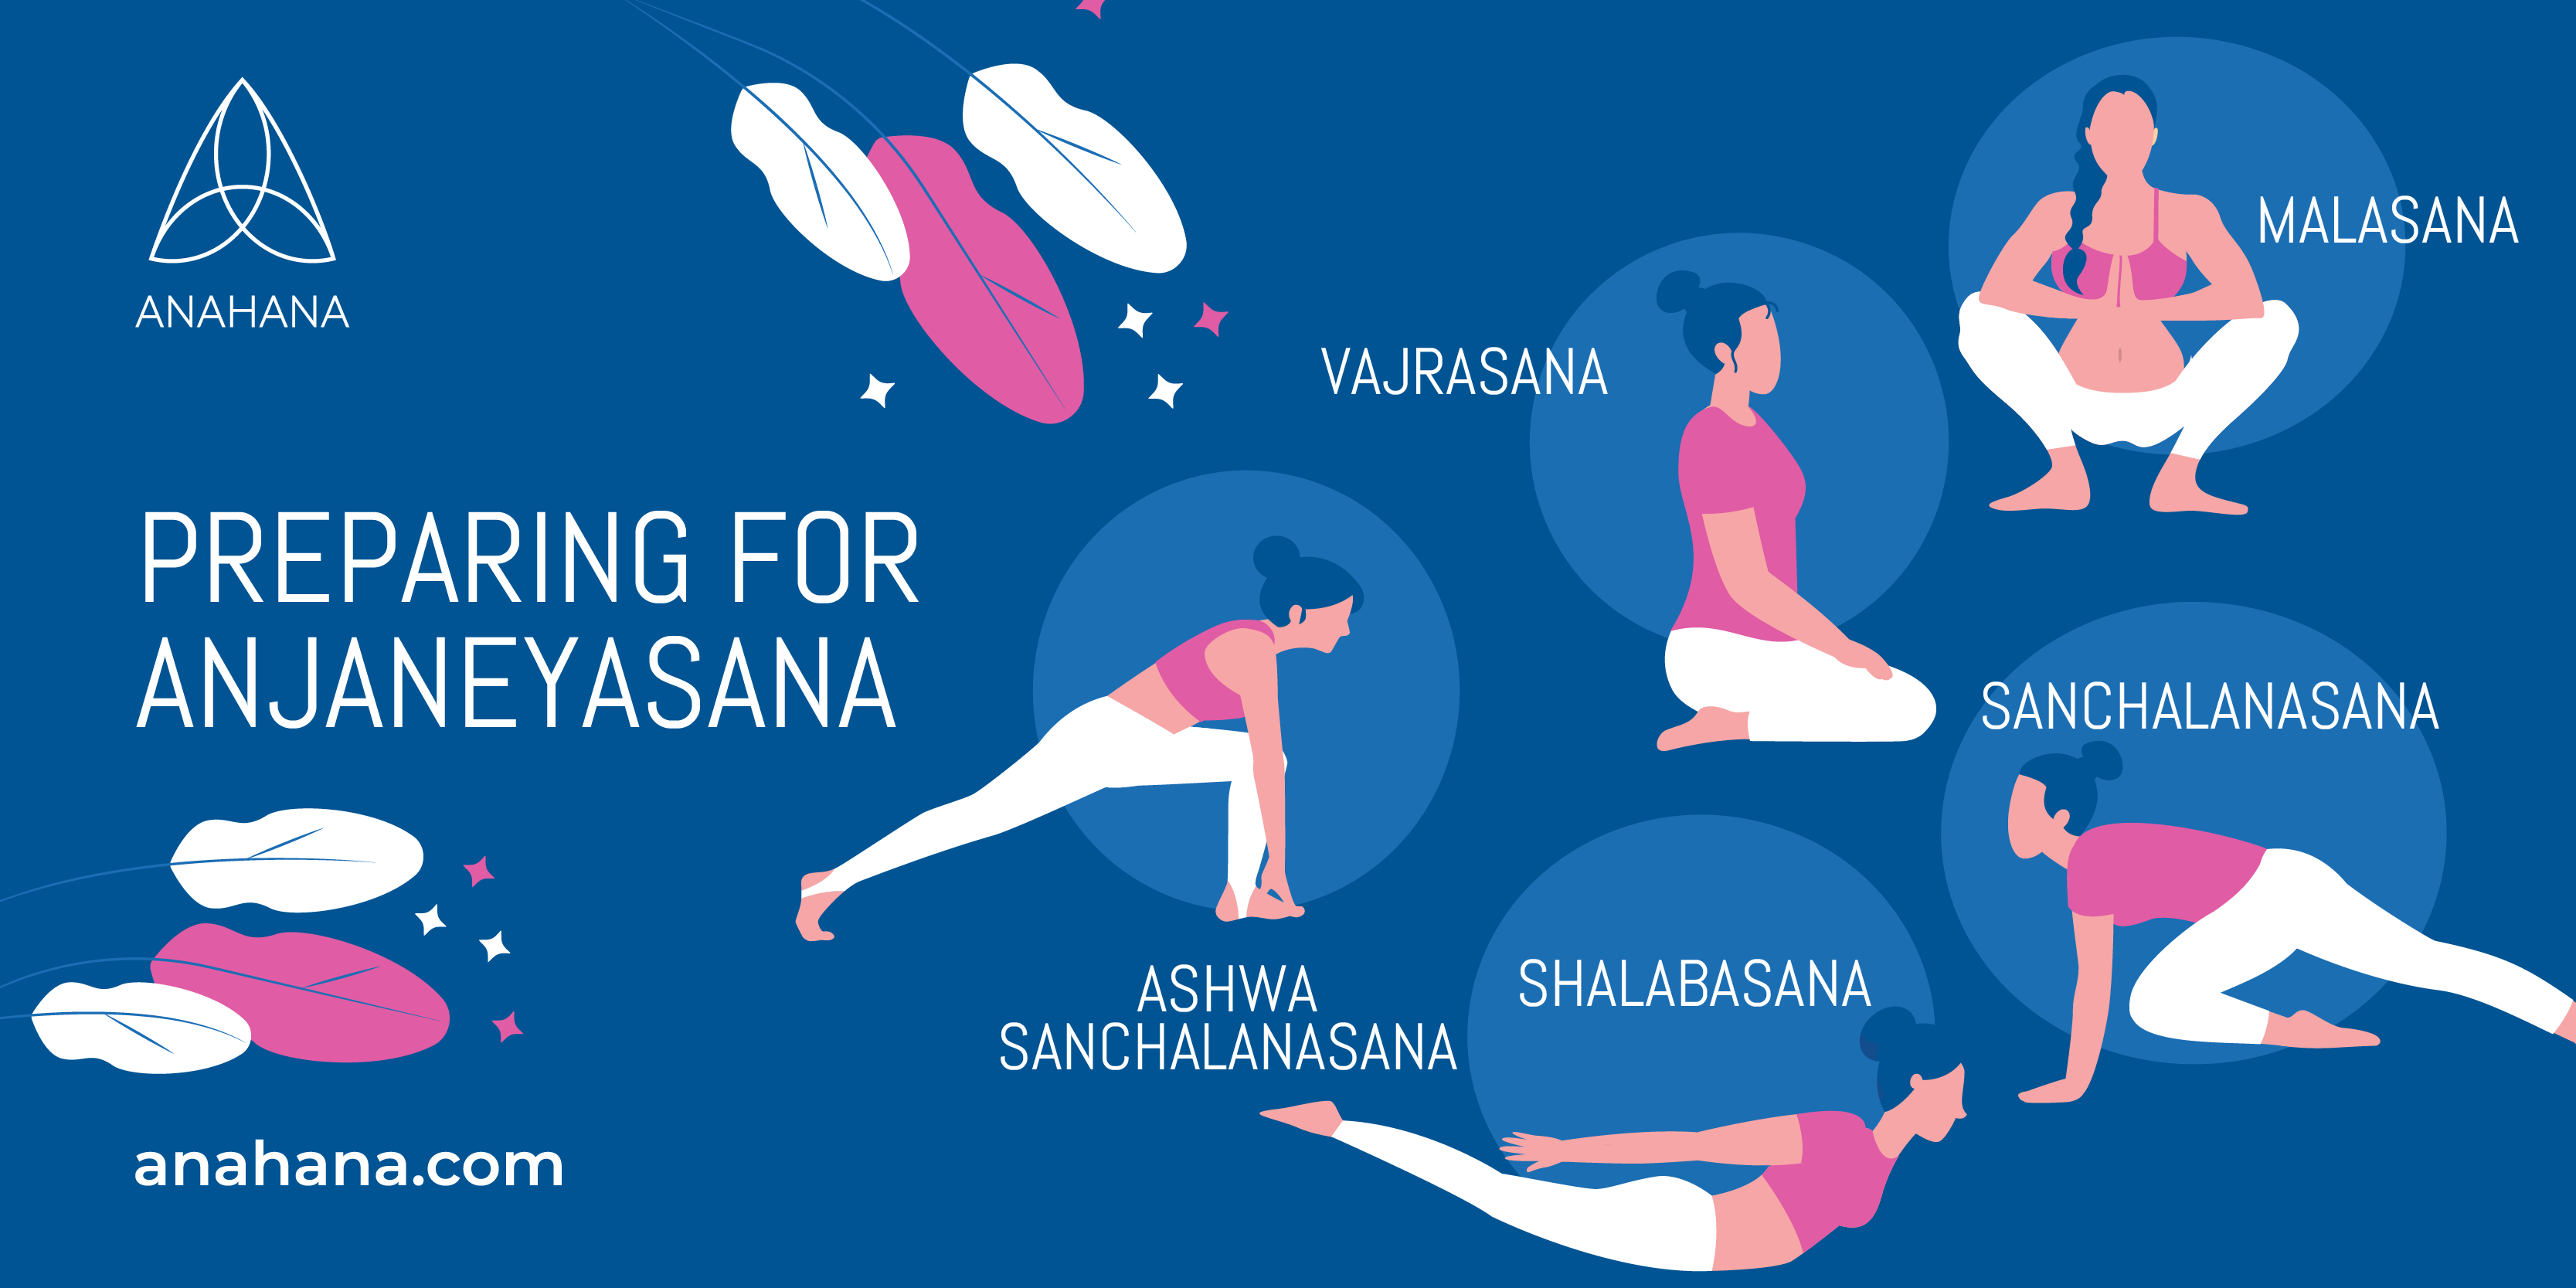 Tadasana In Yoga: Uses, Benefits and The Steps To Do Mountain Pose